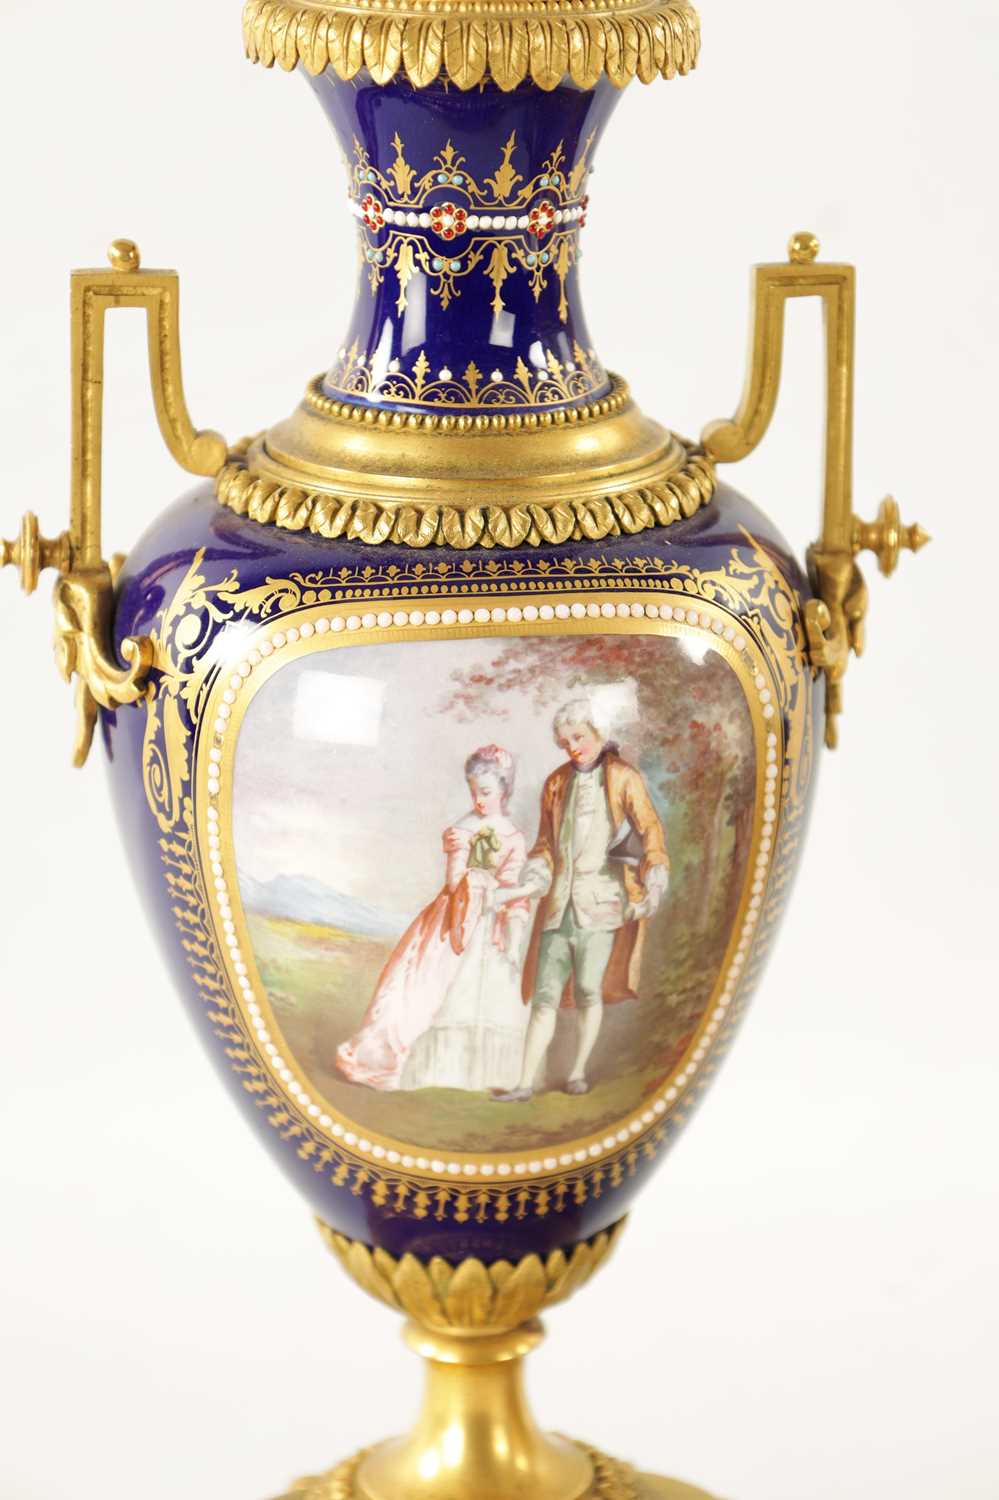 A FINE 19TH CENTURY FRENCH ORMOLU AND SEVRES PORCELAIN CLOCK GARNITURE - Image 5 of 12